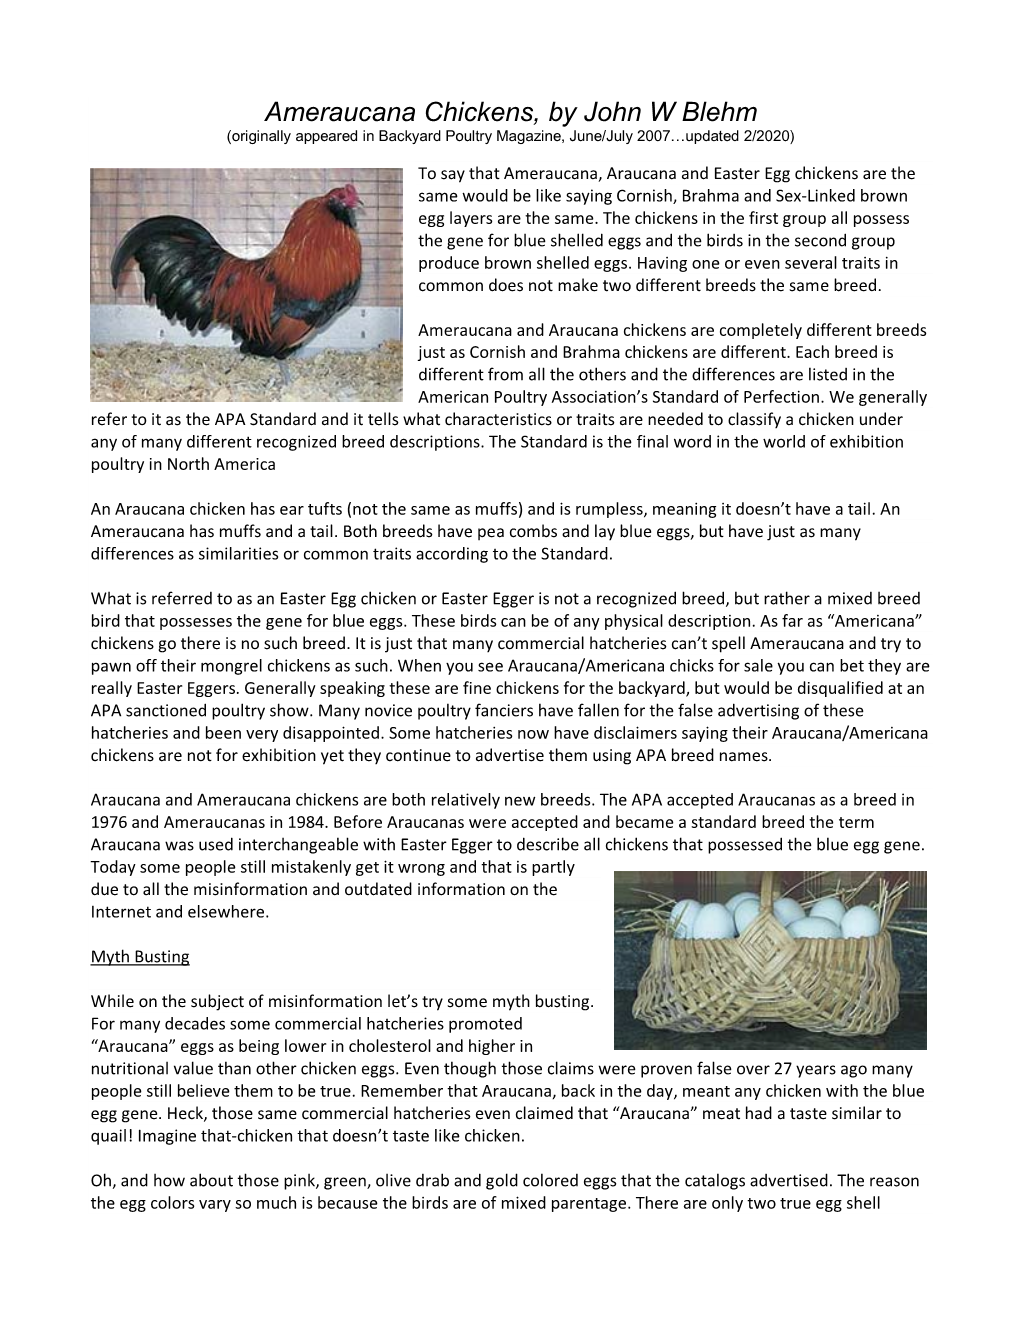 Ameraucana Chickens, by John W Blehm (Originally Appeared in Backyard Poultry Magazine, June/July 2007…Updated 2/2020)